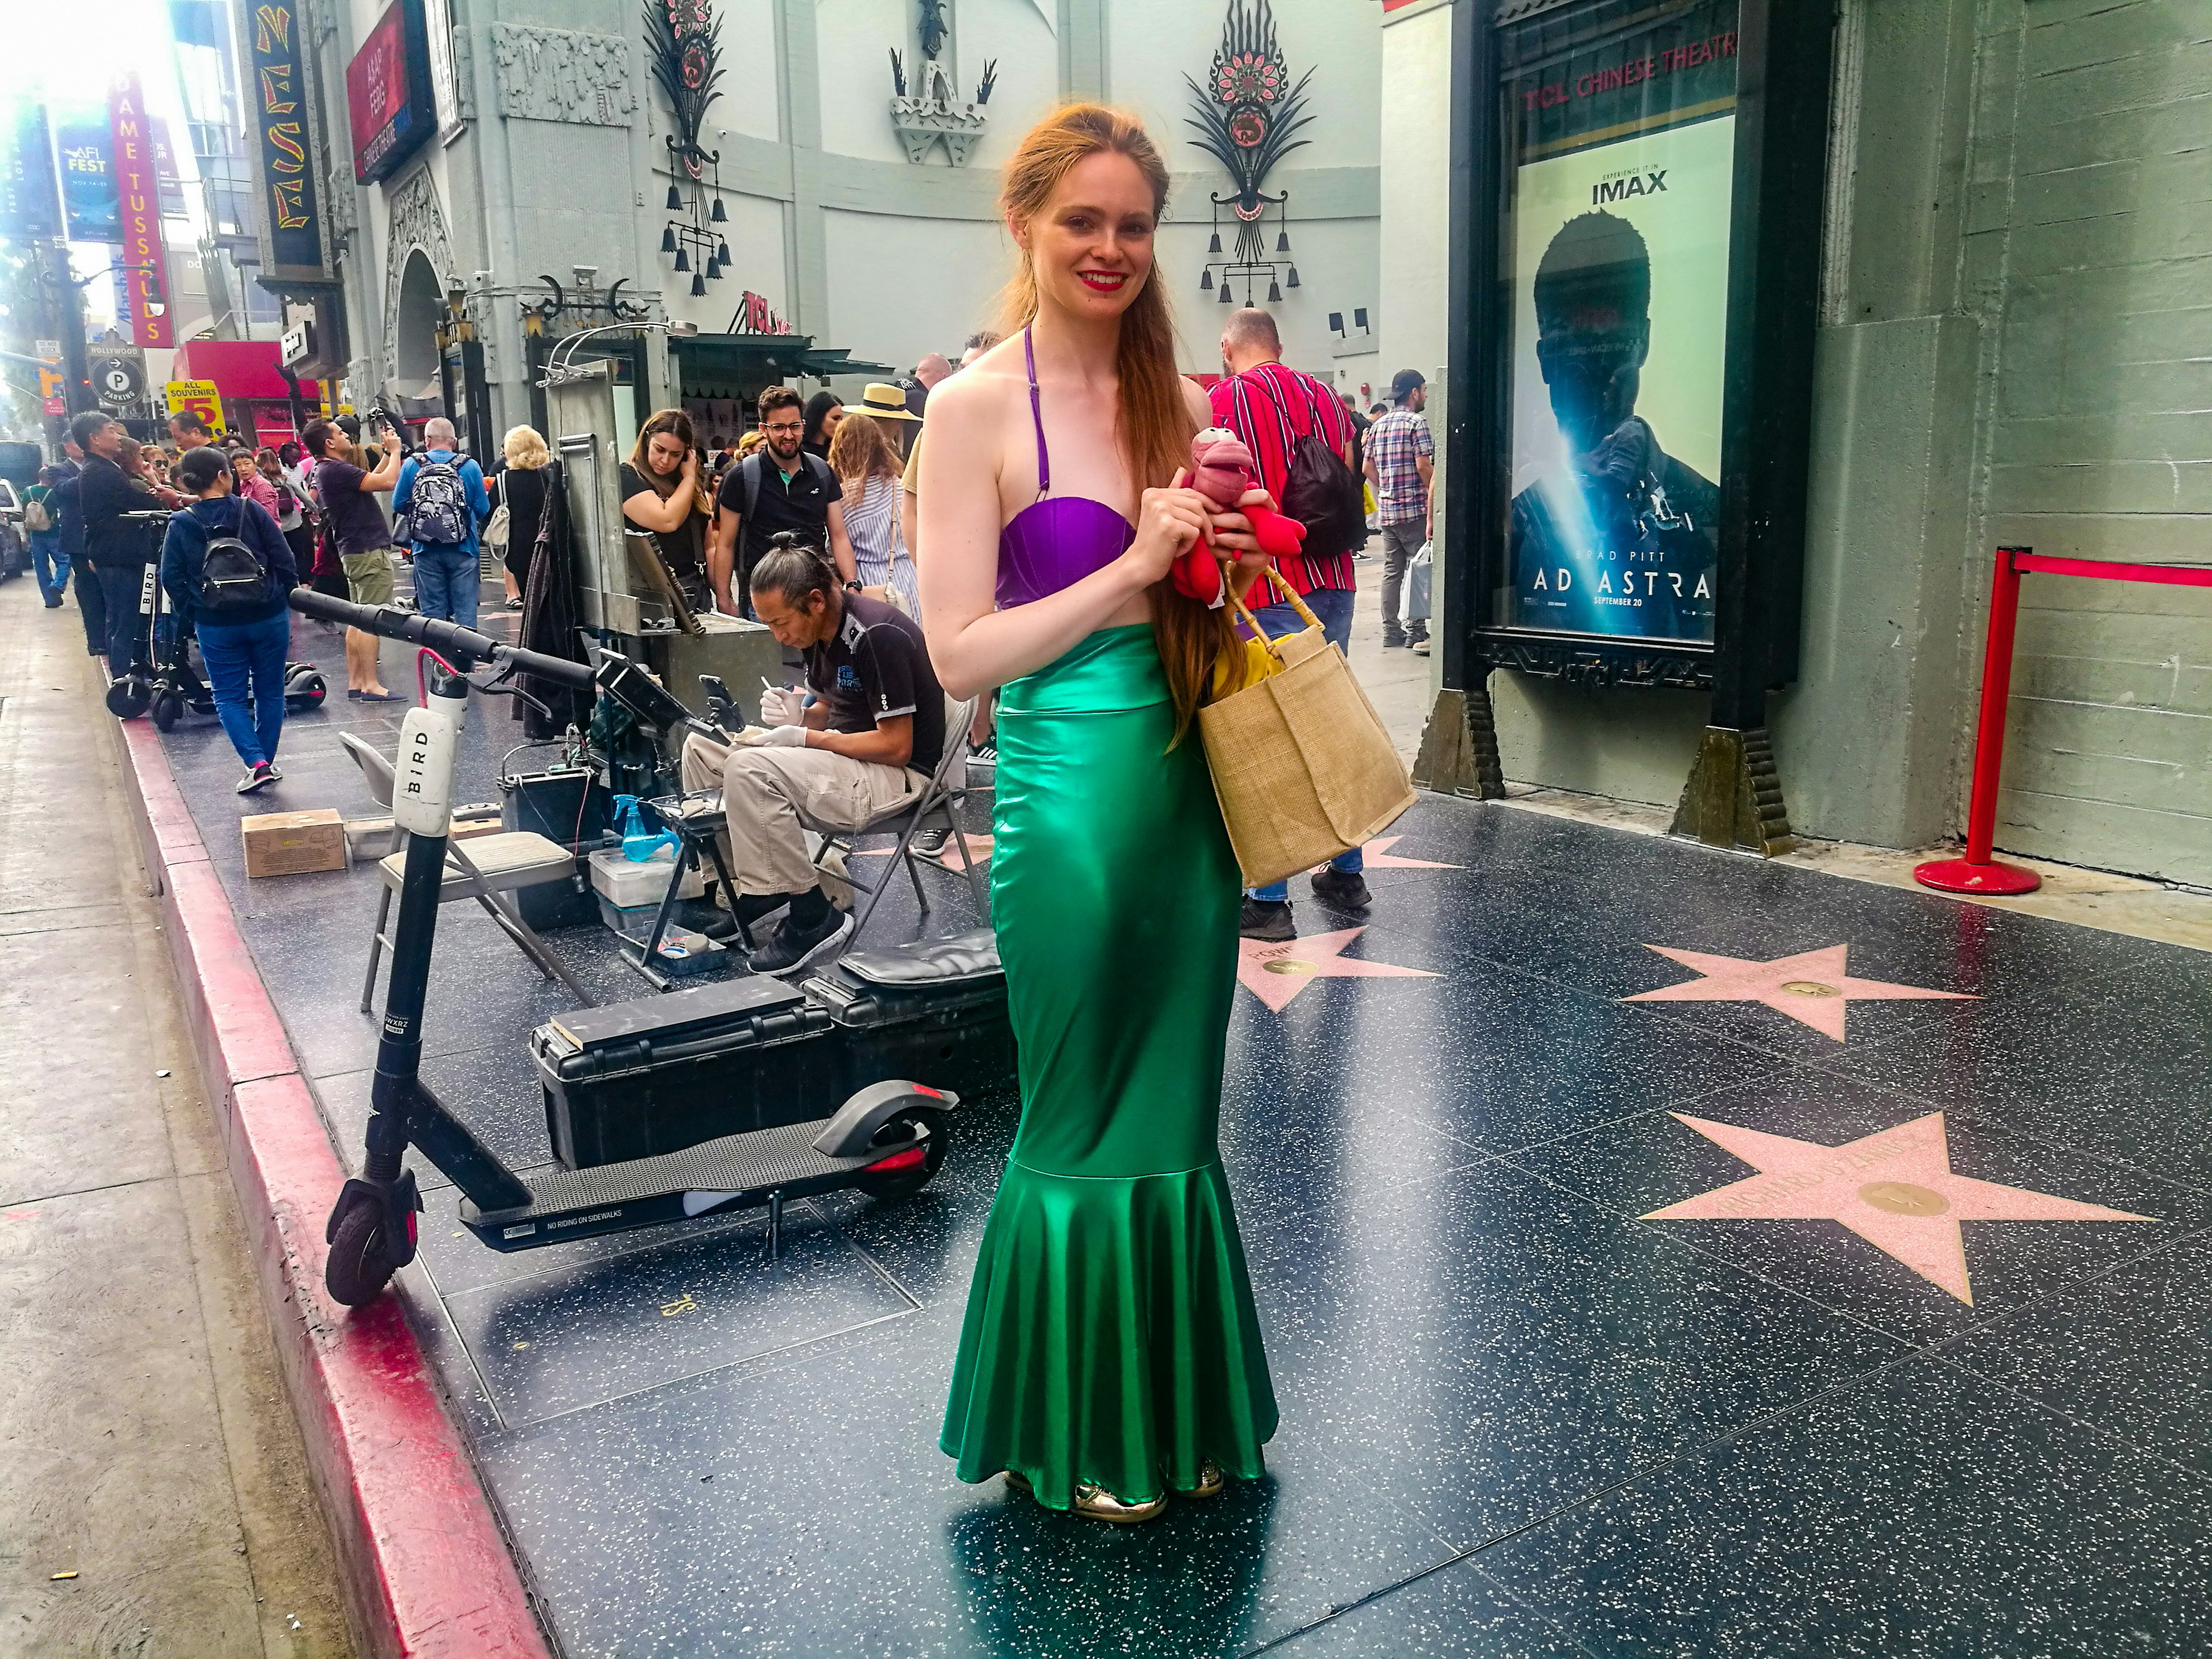 Ariel the Little Mermaid stands on the Hollywood Walk of Fame